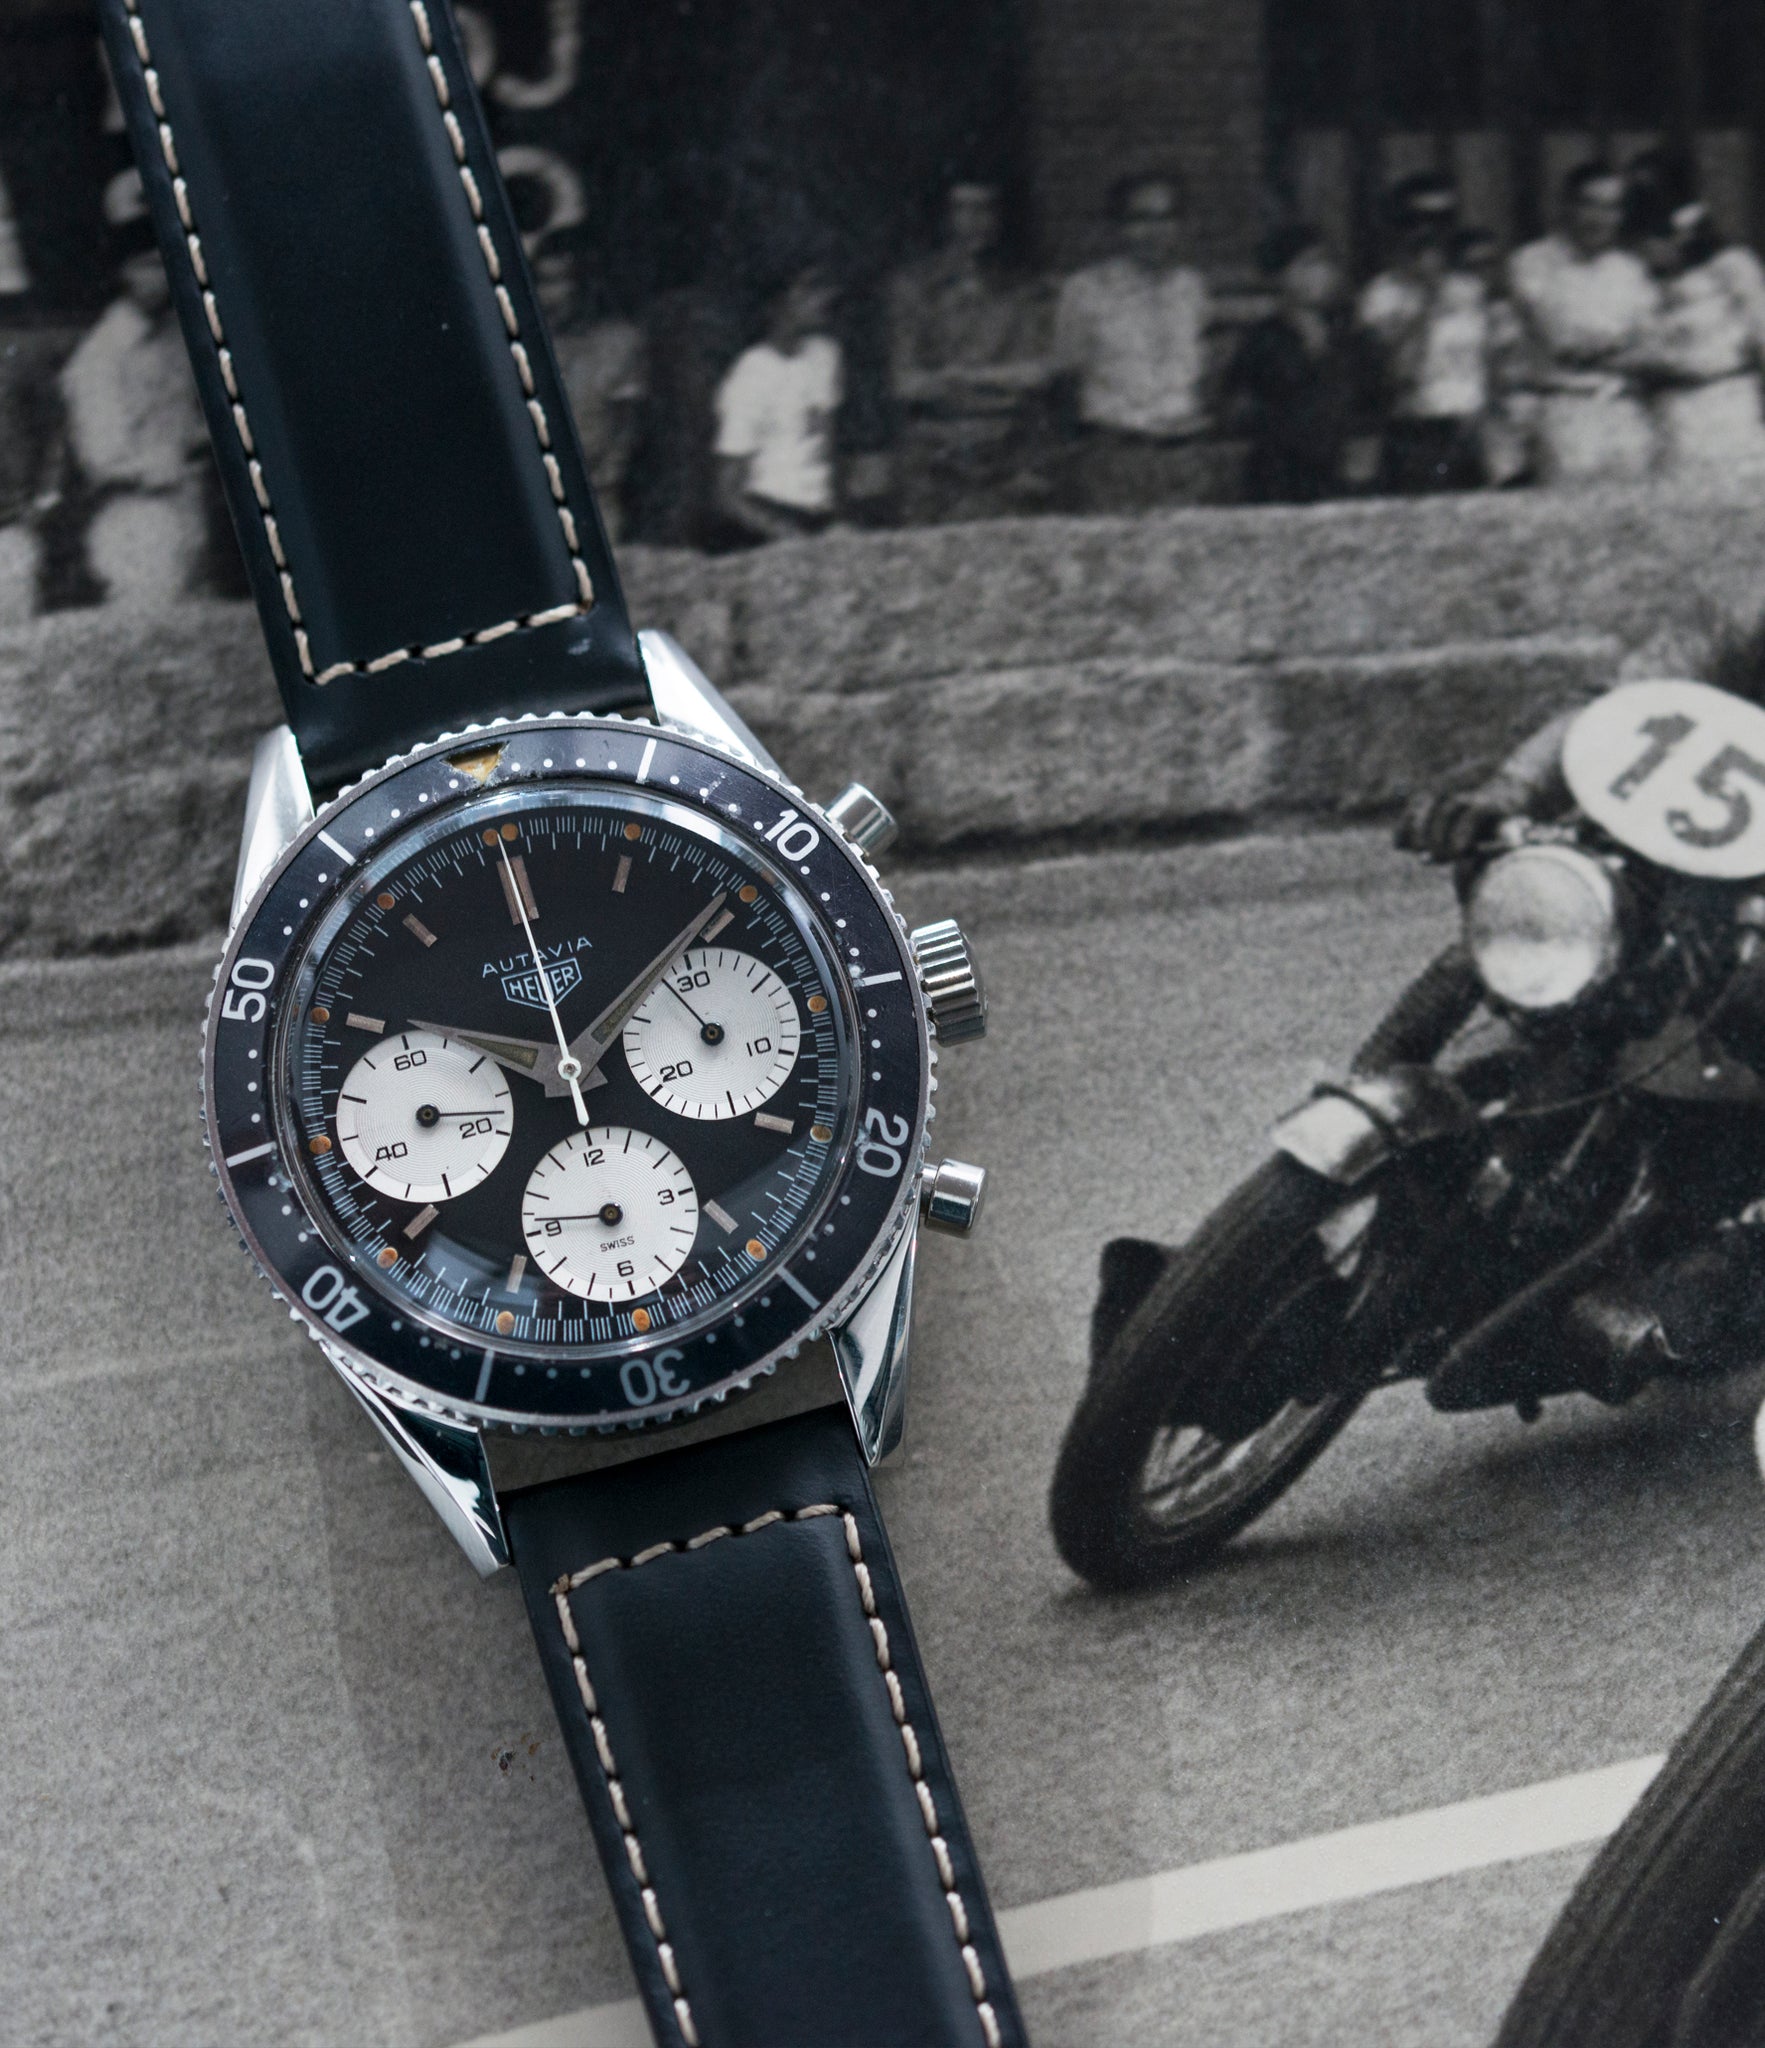 vintage Heuer Autavia 2446 Second Execution Valjoux 72 rare first-owner chronograph steel racing sport watch for sale online at A Collected Man London UK rare watch specilaist